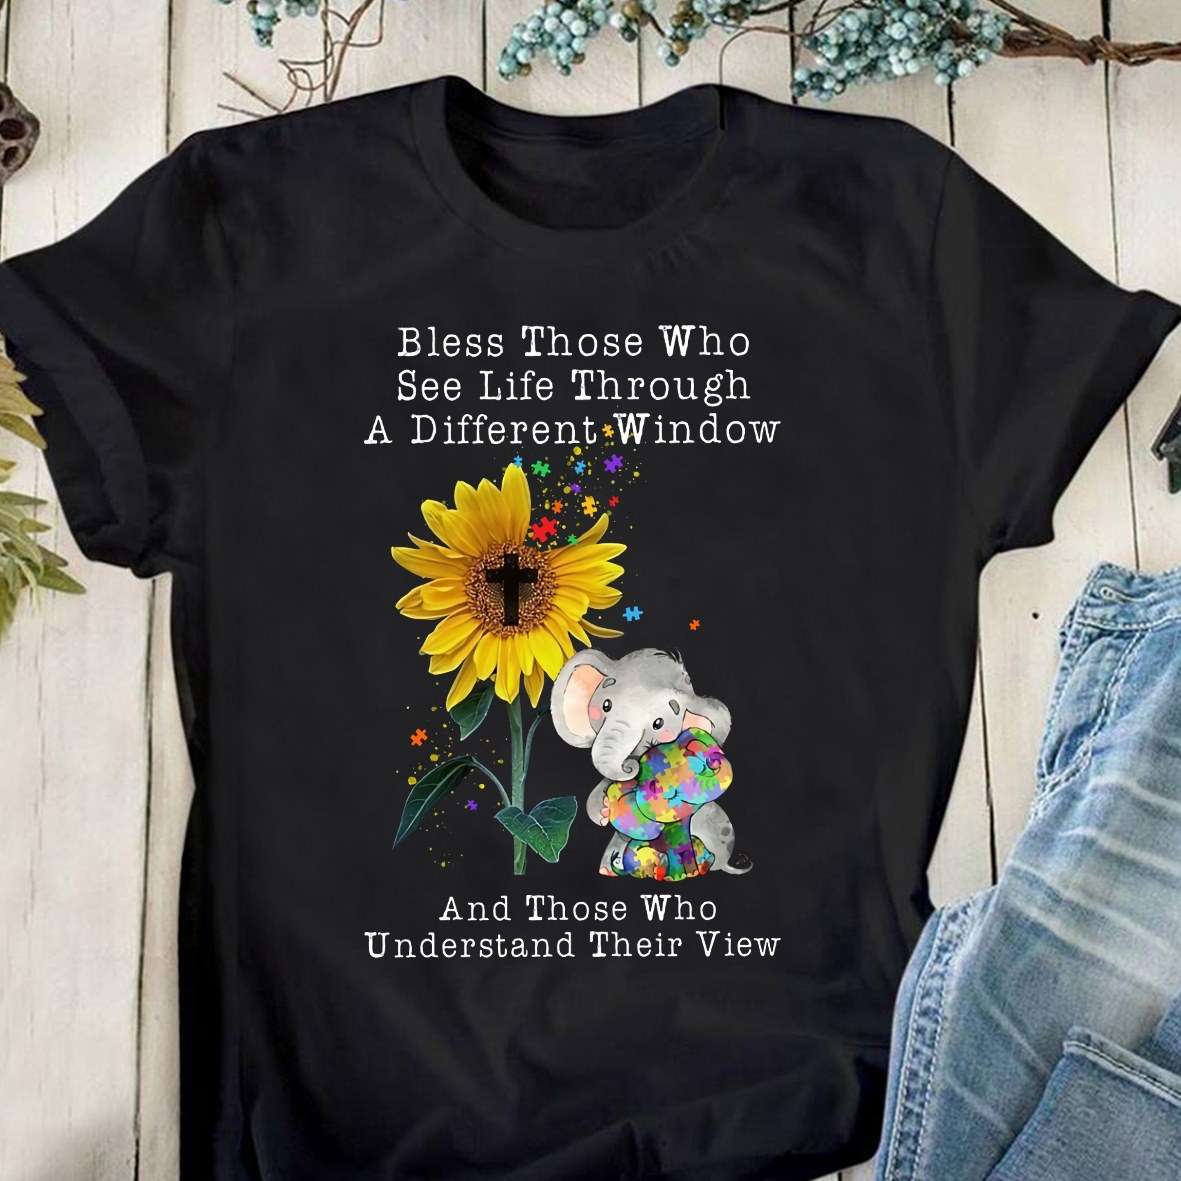 Bless those who see life through a different window - Autism awareness, autism elephants